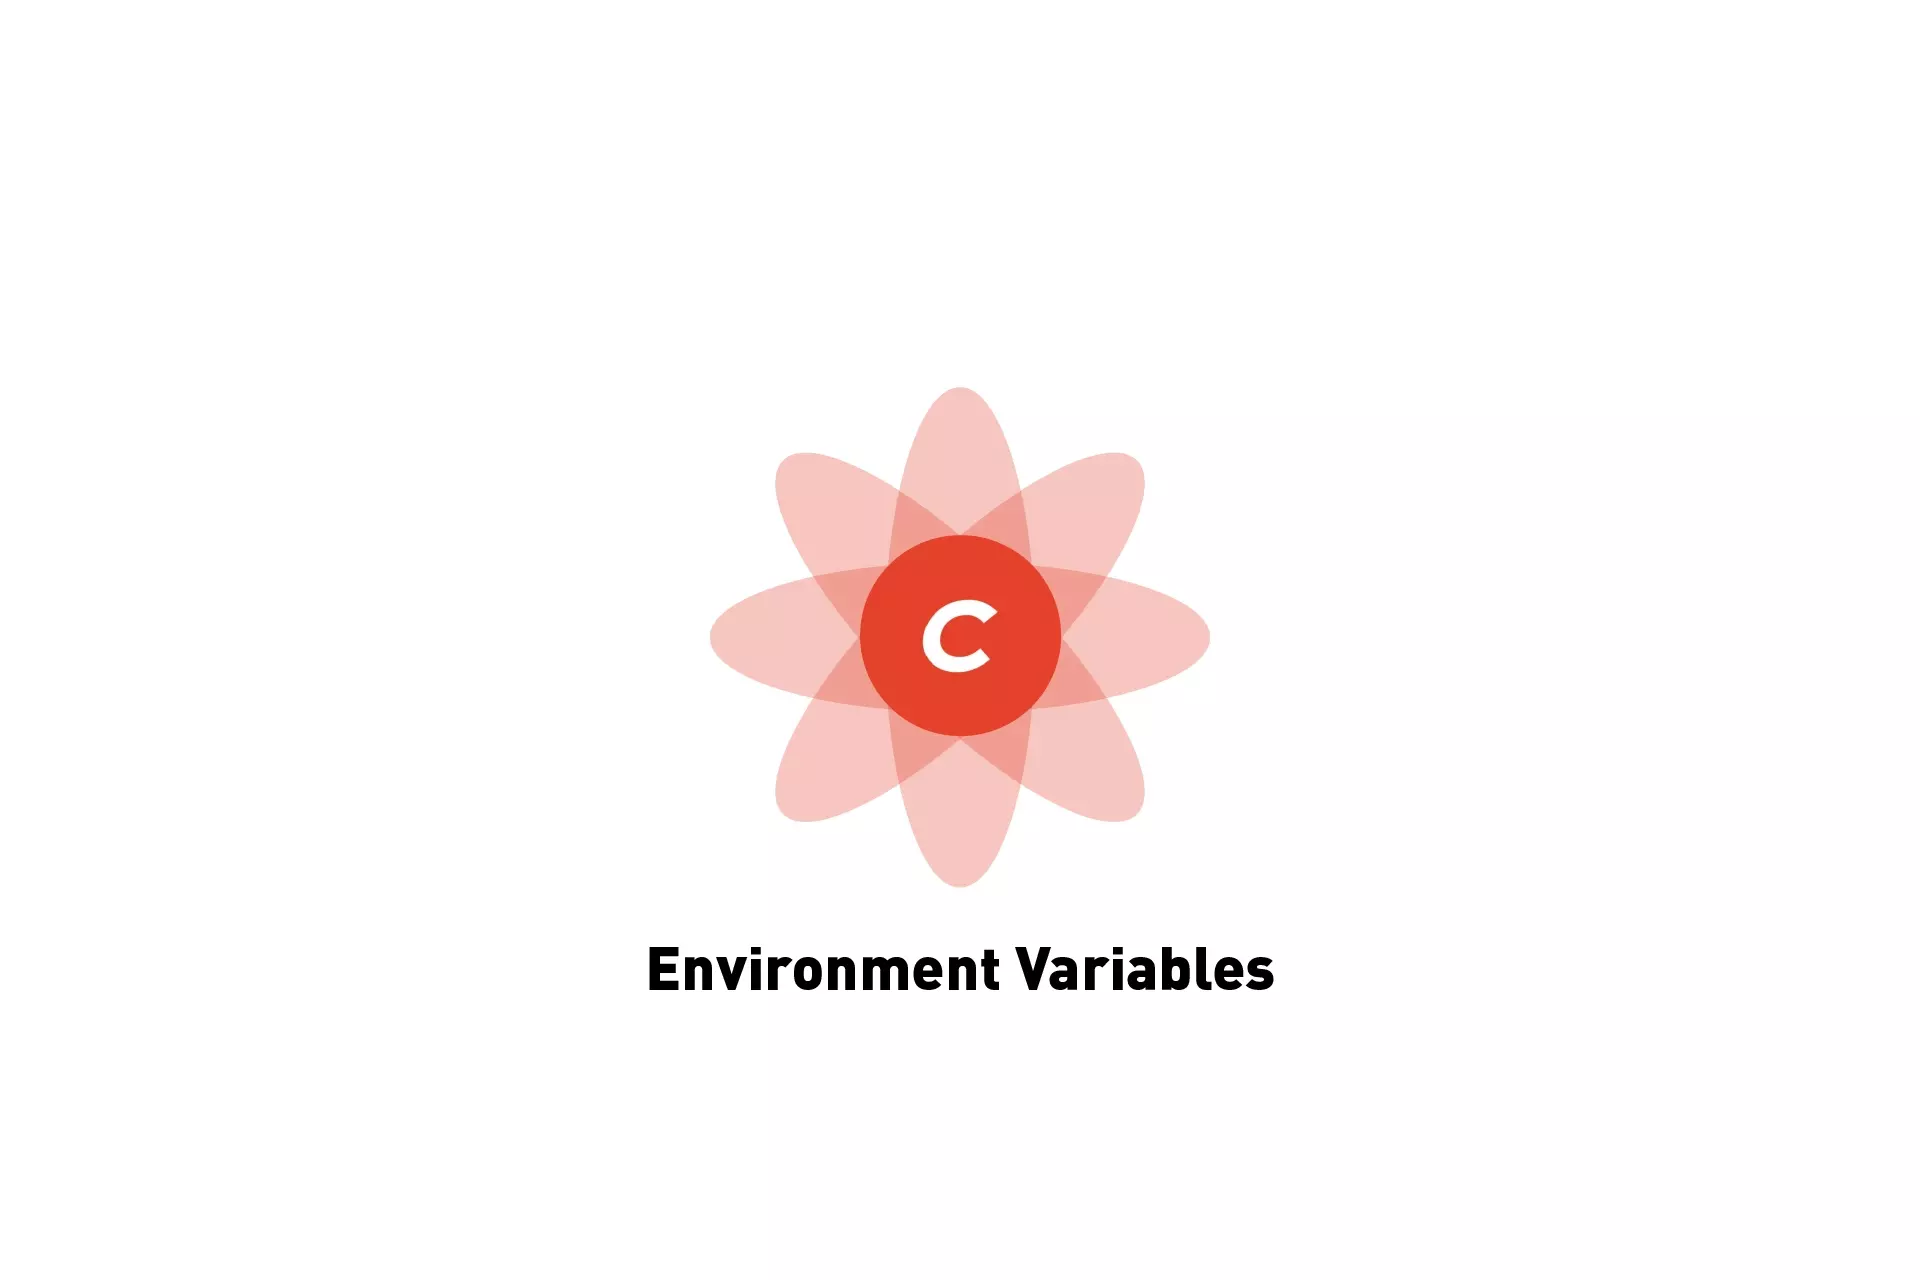 A flower that represents Craft CMS. Beneath it sits the text "Environment Variables."